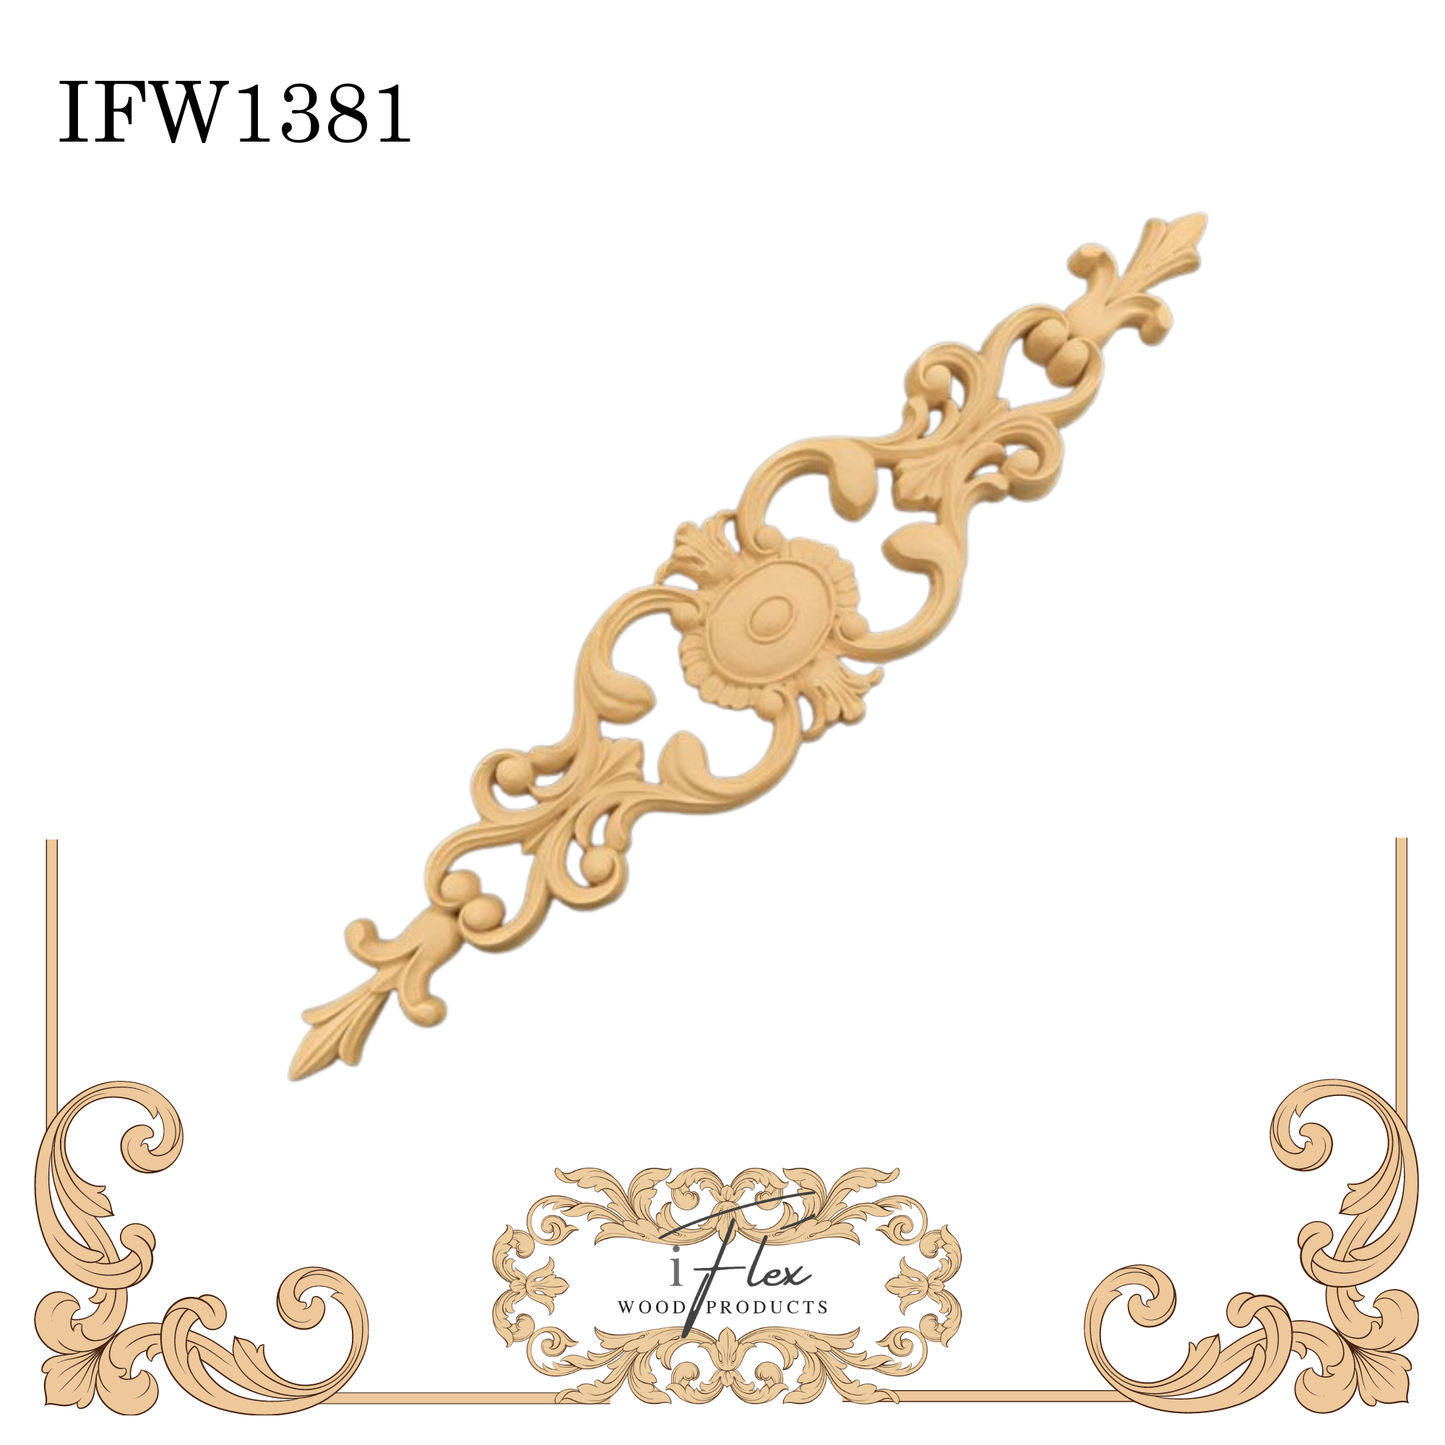 IFW 1381 iFlex Wood Products, bendable mouldings, flexible, wooden appliques, pediment